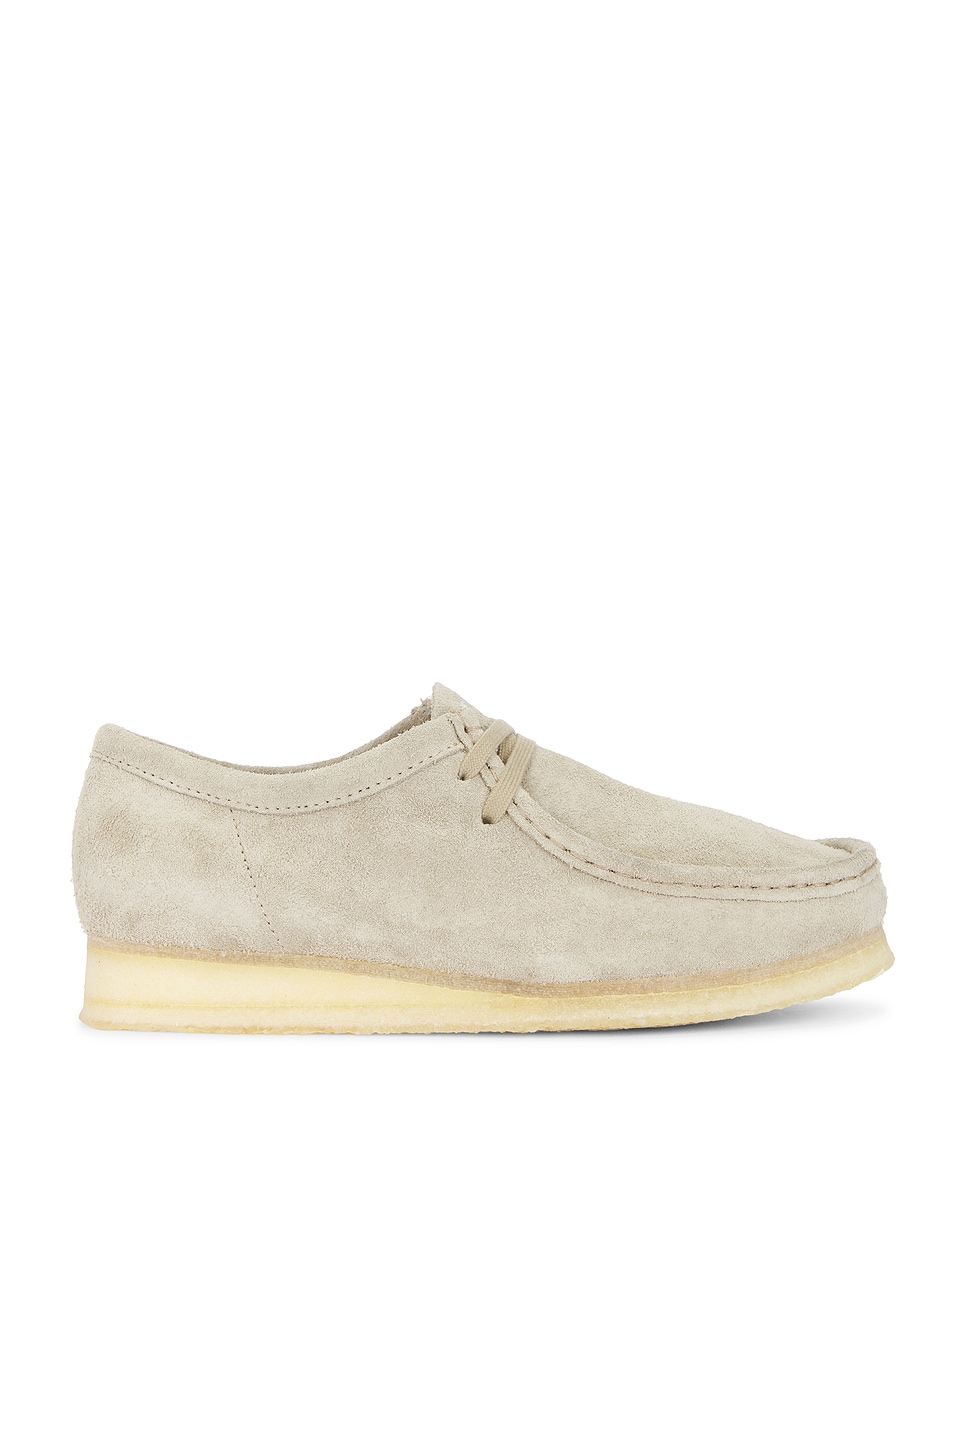 Image 1 of Clarks Wallabee Boot in Pale Grey Suede